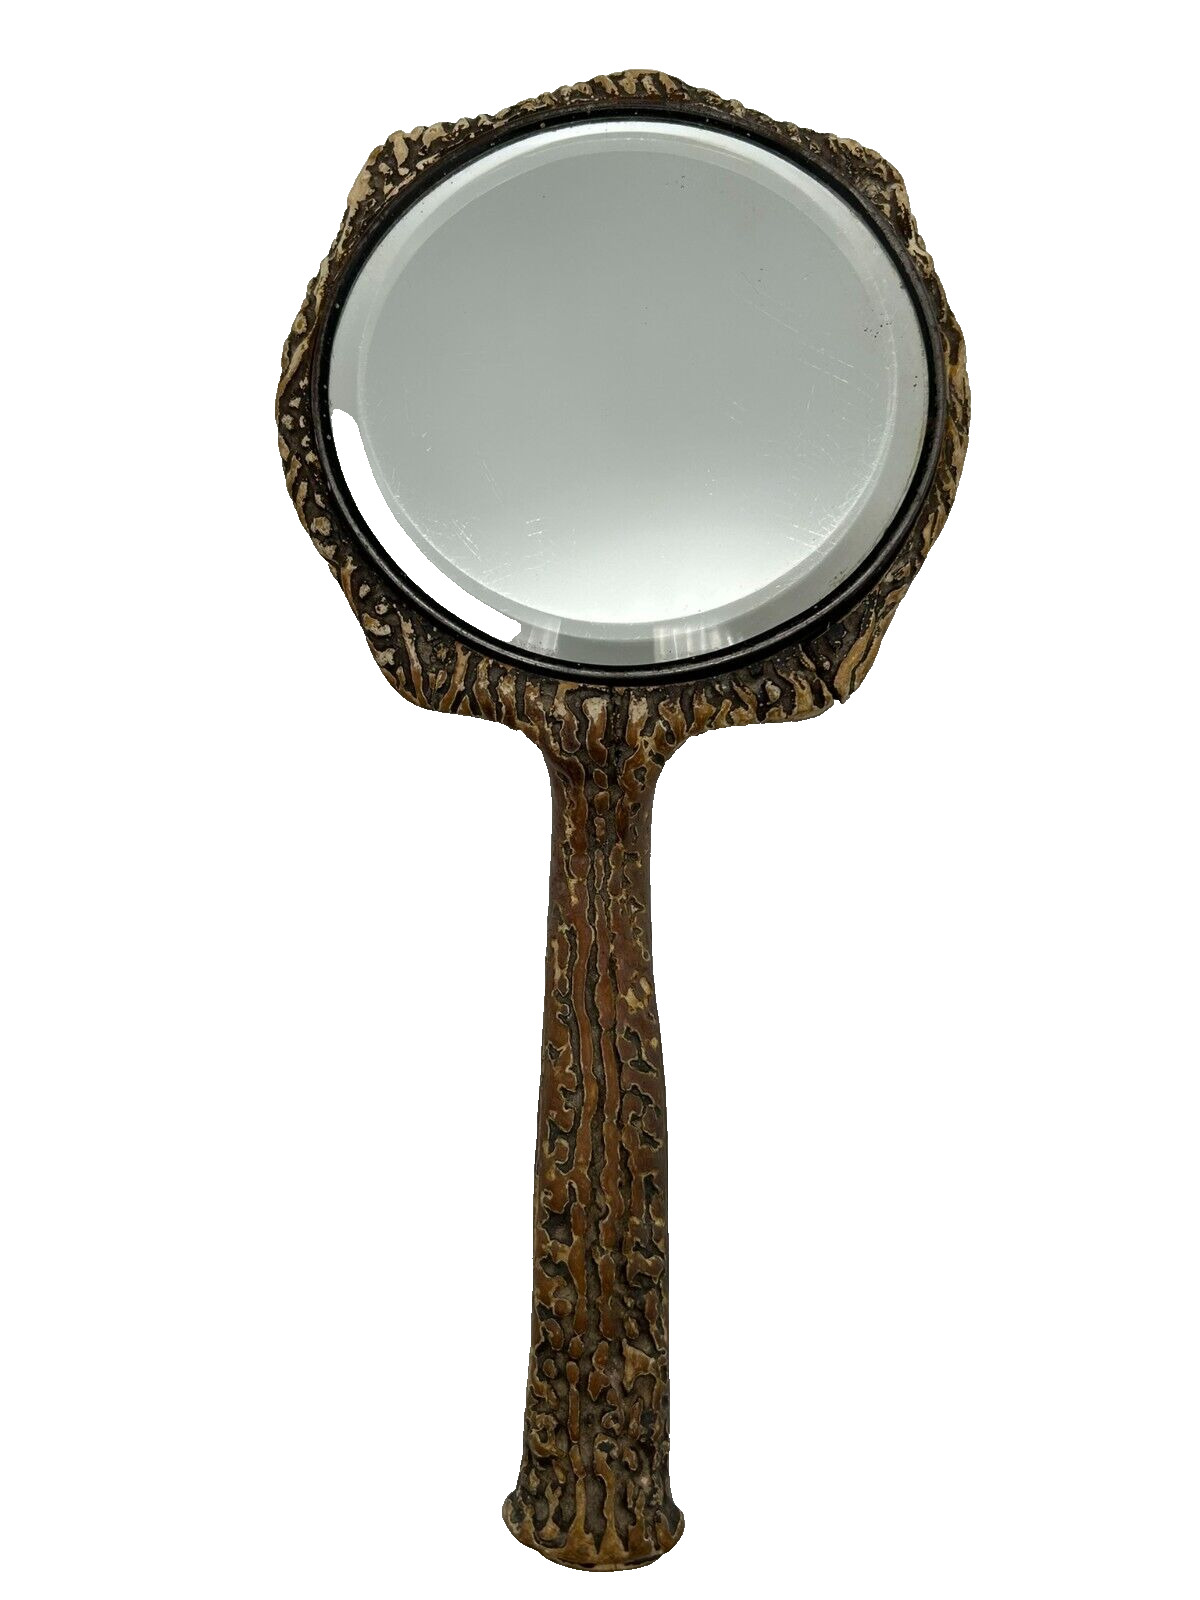 Antique Carved Faux Bois Renaissance Handheld Beveled Mirror With Backplate